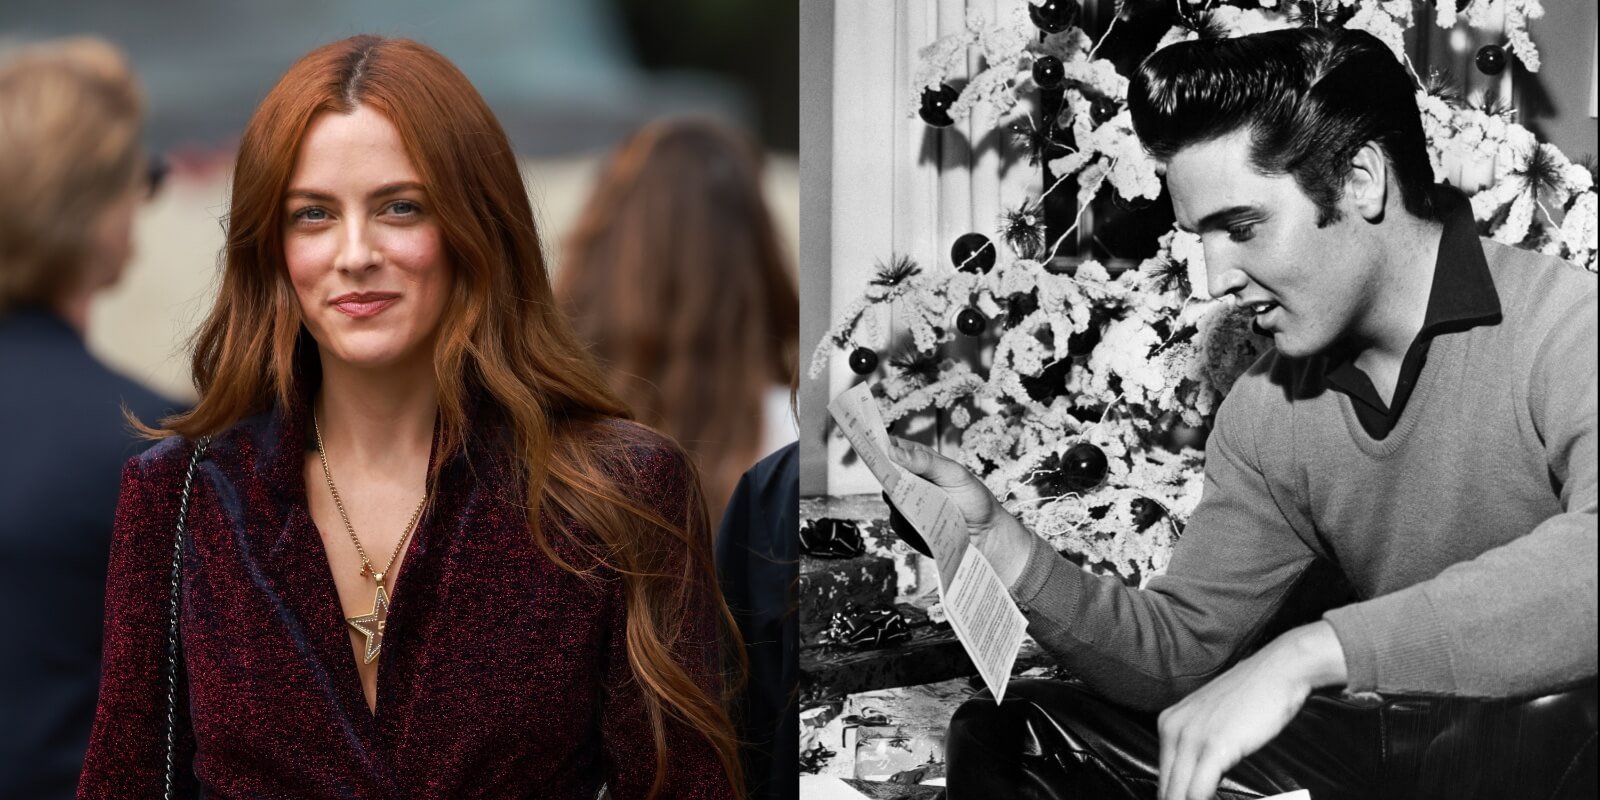 Riley Keough and her grandfather Elvis Presley in side-by-side photographs.